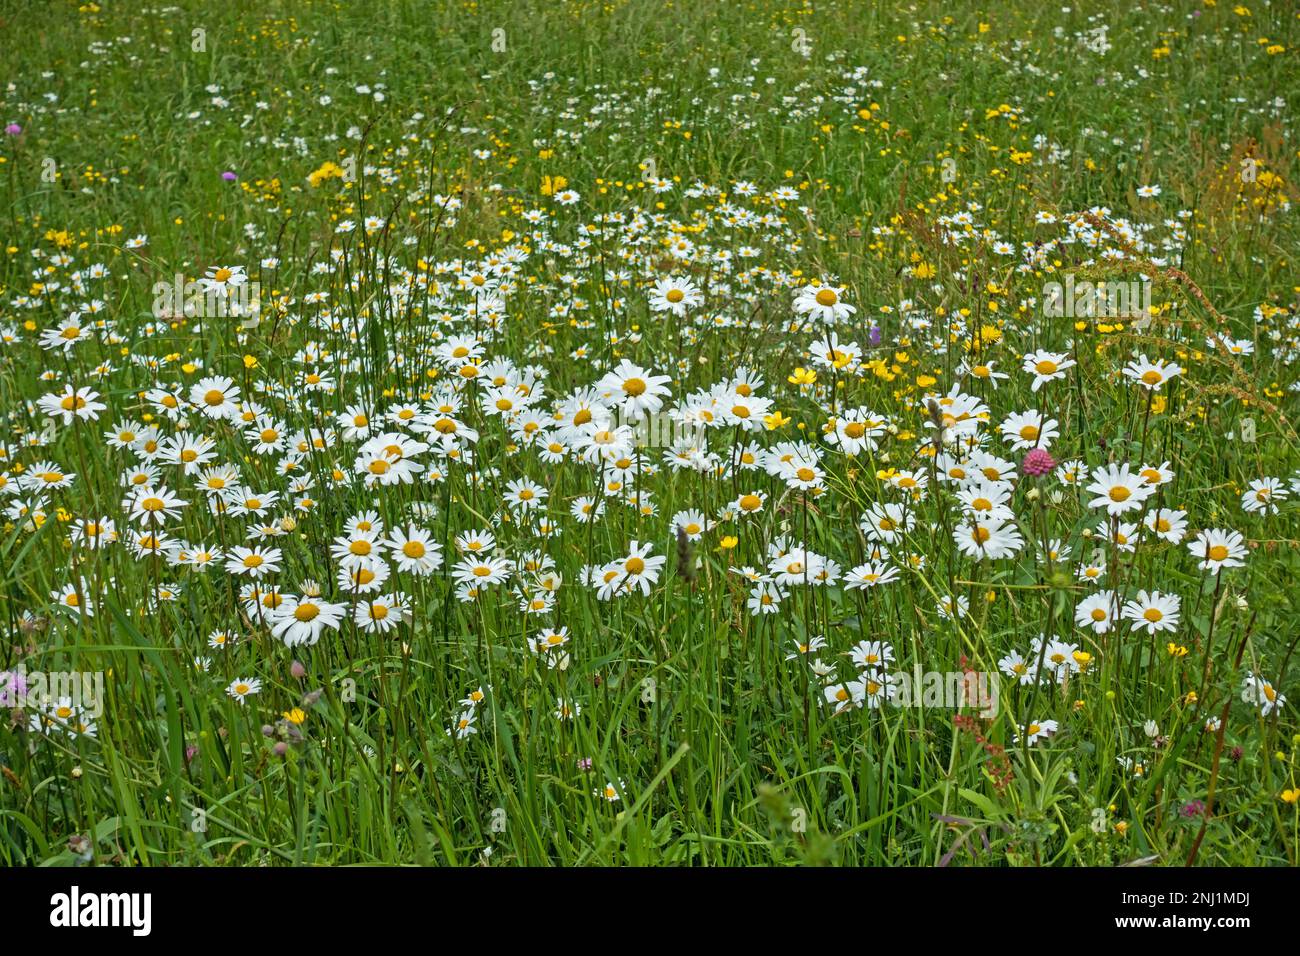 A multitude of white blooming daisies on a spring flower meadow in the alpine landscape of South Tyrol, Italy Stock Photo